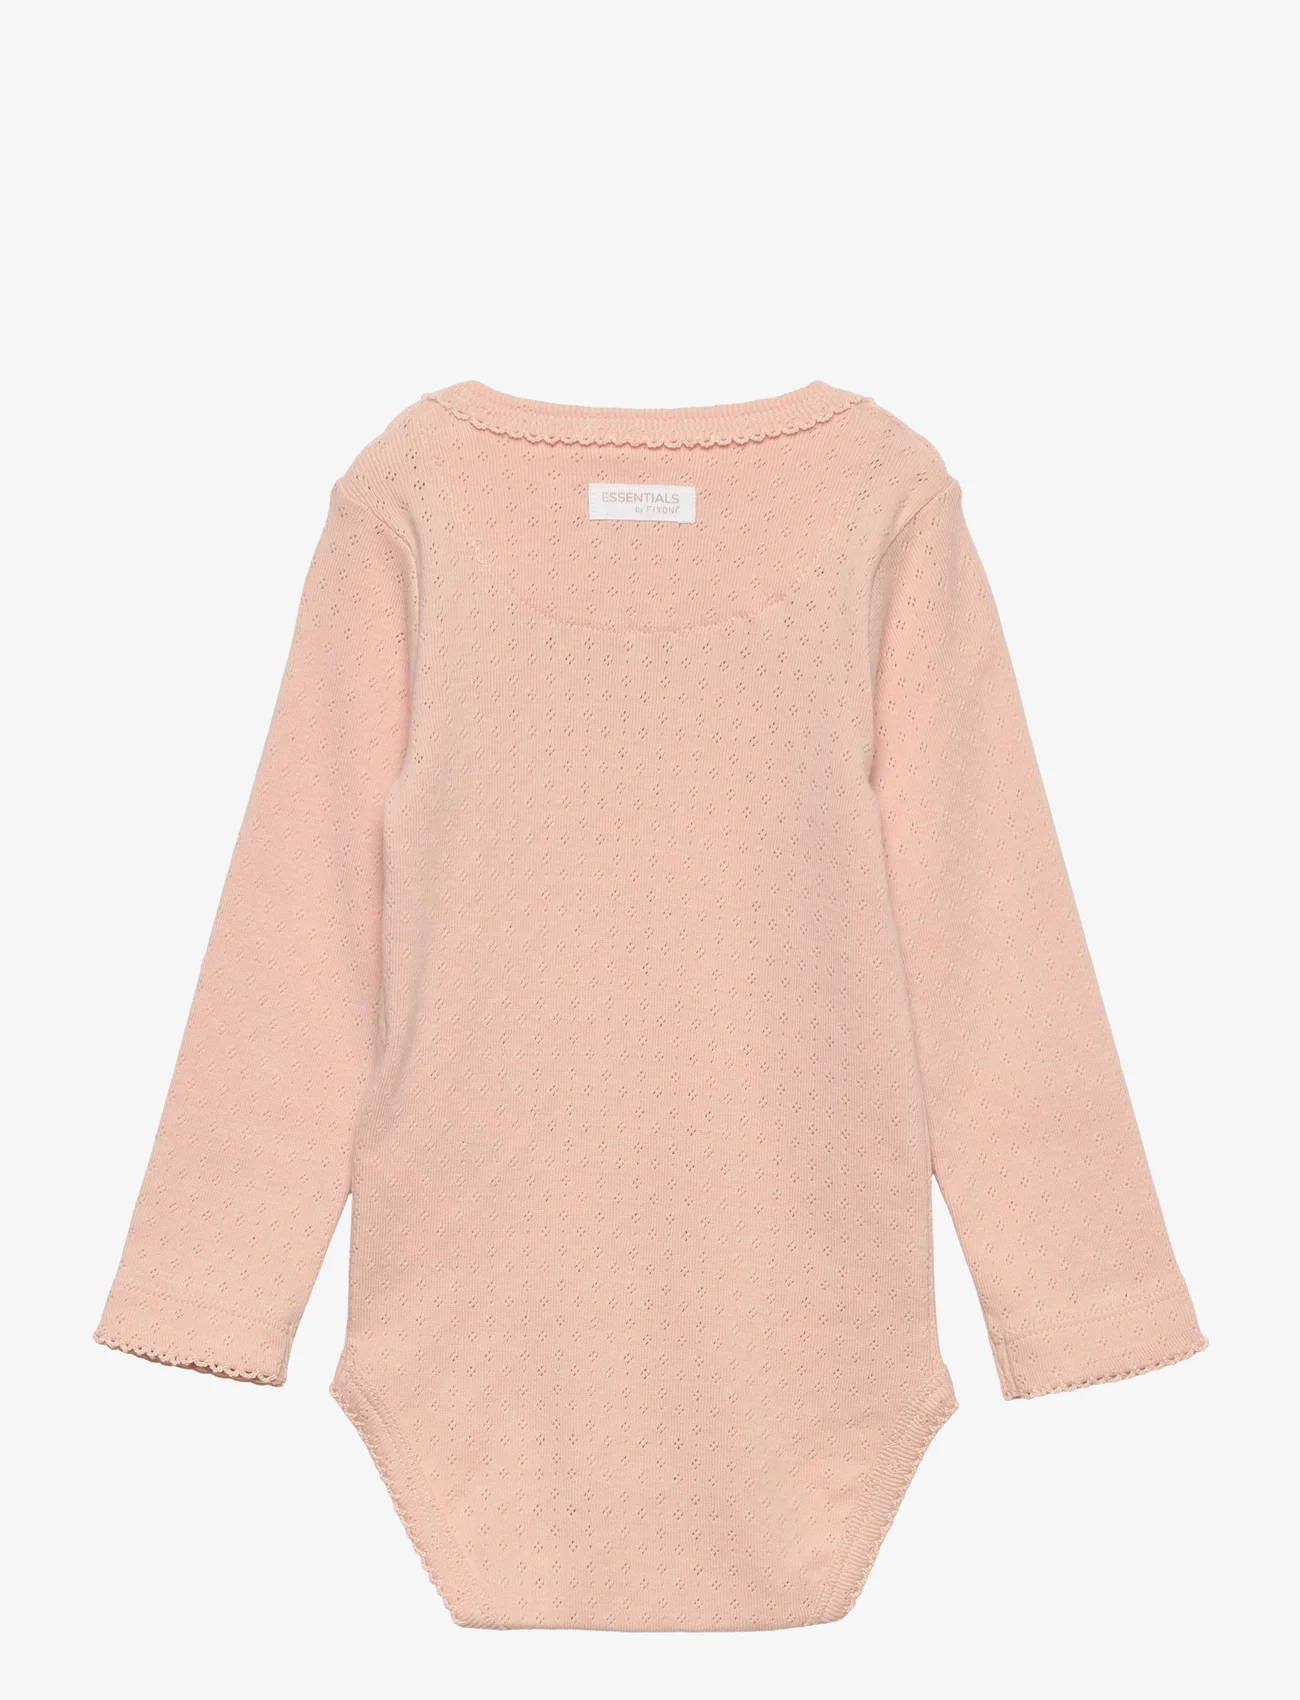 Fixoni - Body LS Pointelle - lowest prices - cameo rose - 1